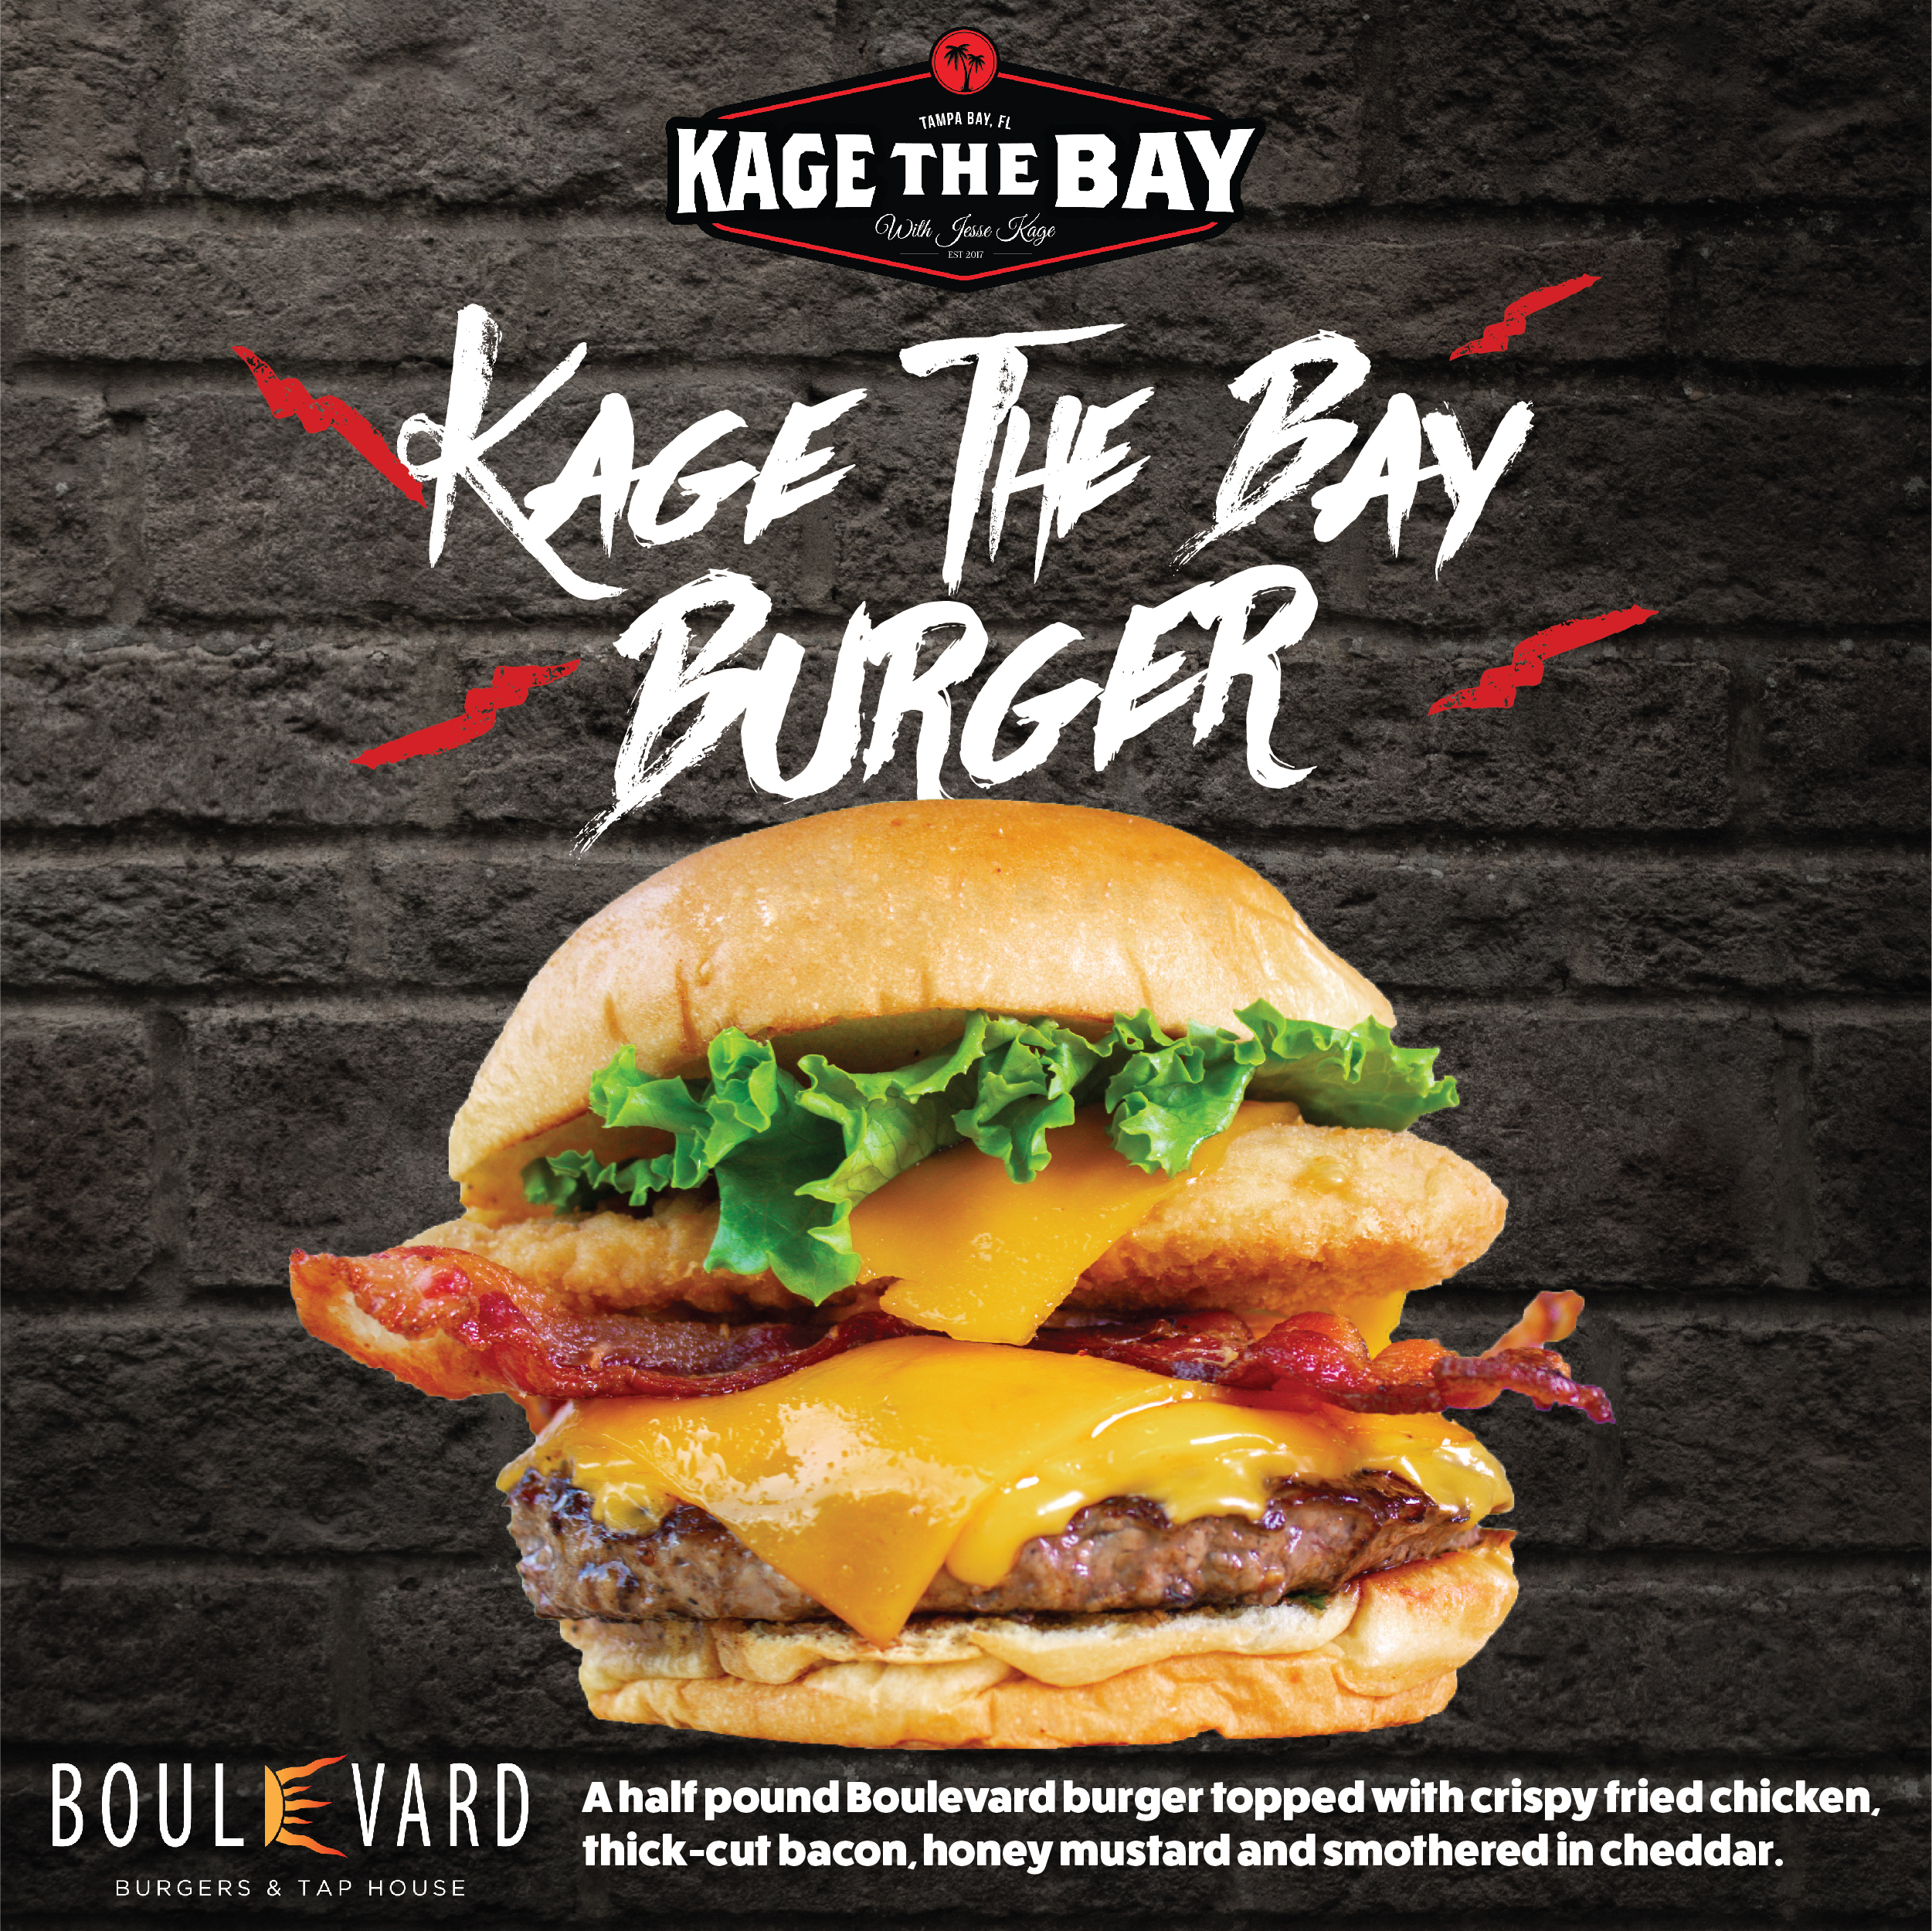 Boulevard Burgers & Tap House Releases Monstrous Kage The Bay Burger